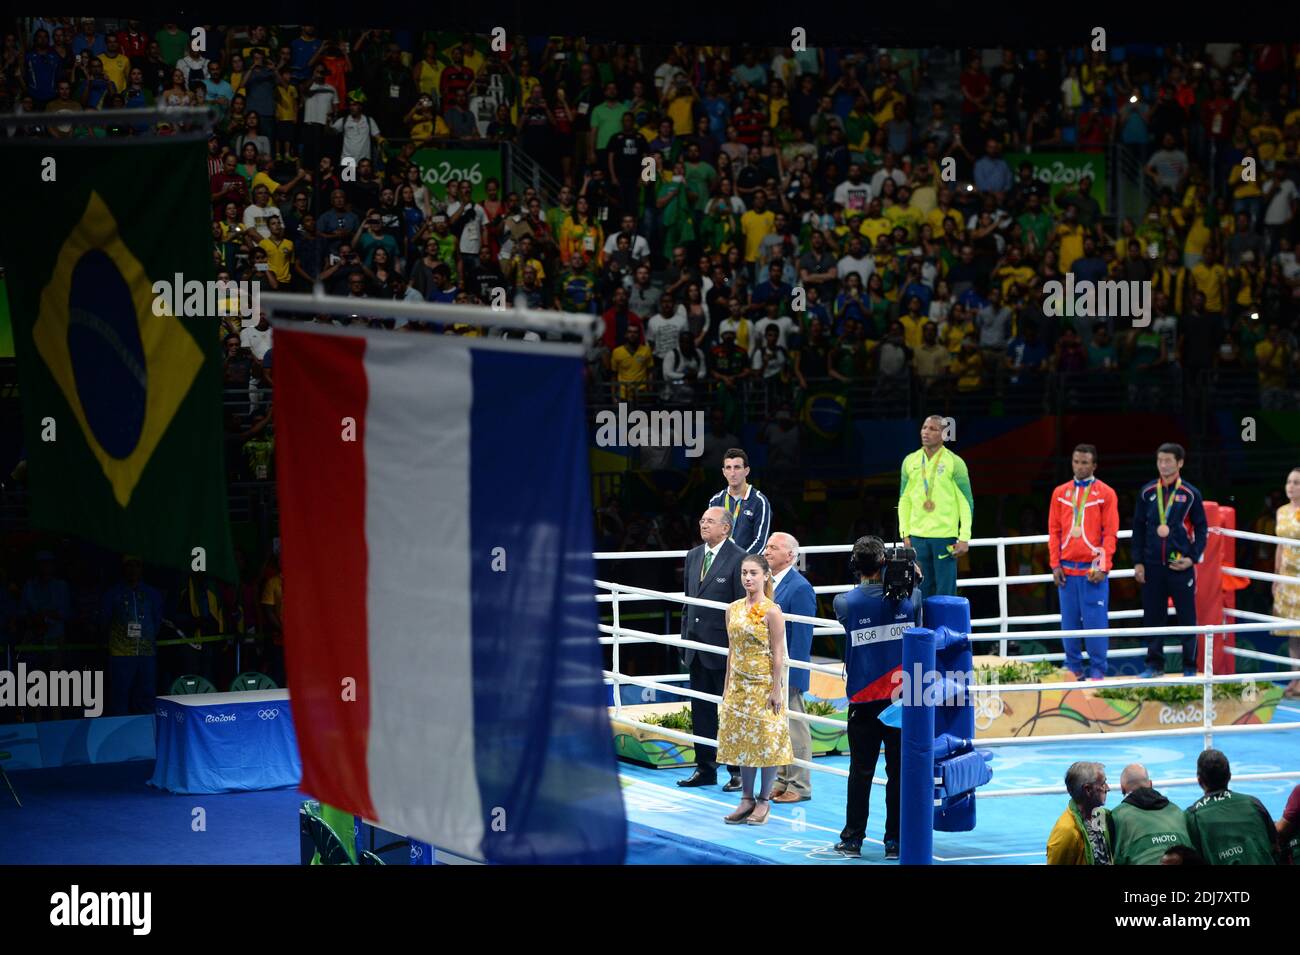 Silver medalist Sofiane Oumiha of France, gold medalist Robson Conceicao of Brazil, bronze medalist Lazaro Jorge Alvarez of Cuba and bronze medalist Otgondalai Dorjnyambuu of Mongolia stand on the podium during the medal ceremony for the Men's Light (60kg) boxing event on Day 11 of the Rio 2016 Olympic Games at Riocentro - Pavilion 6 on August 16, 2016 in Rio de Janeiro, Brazil. Photo by Lionel Hahn/ABACAPRESS.COM Stock Photo